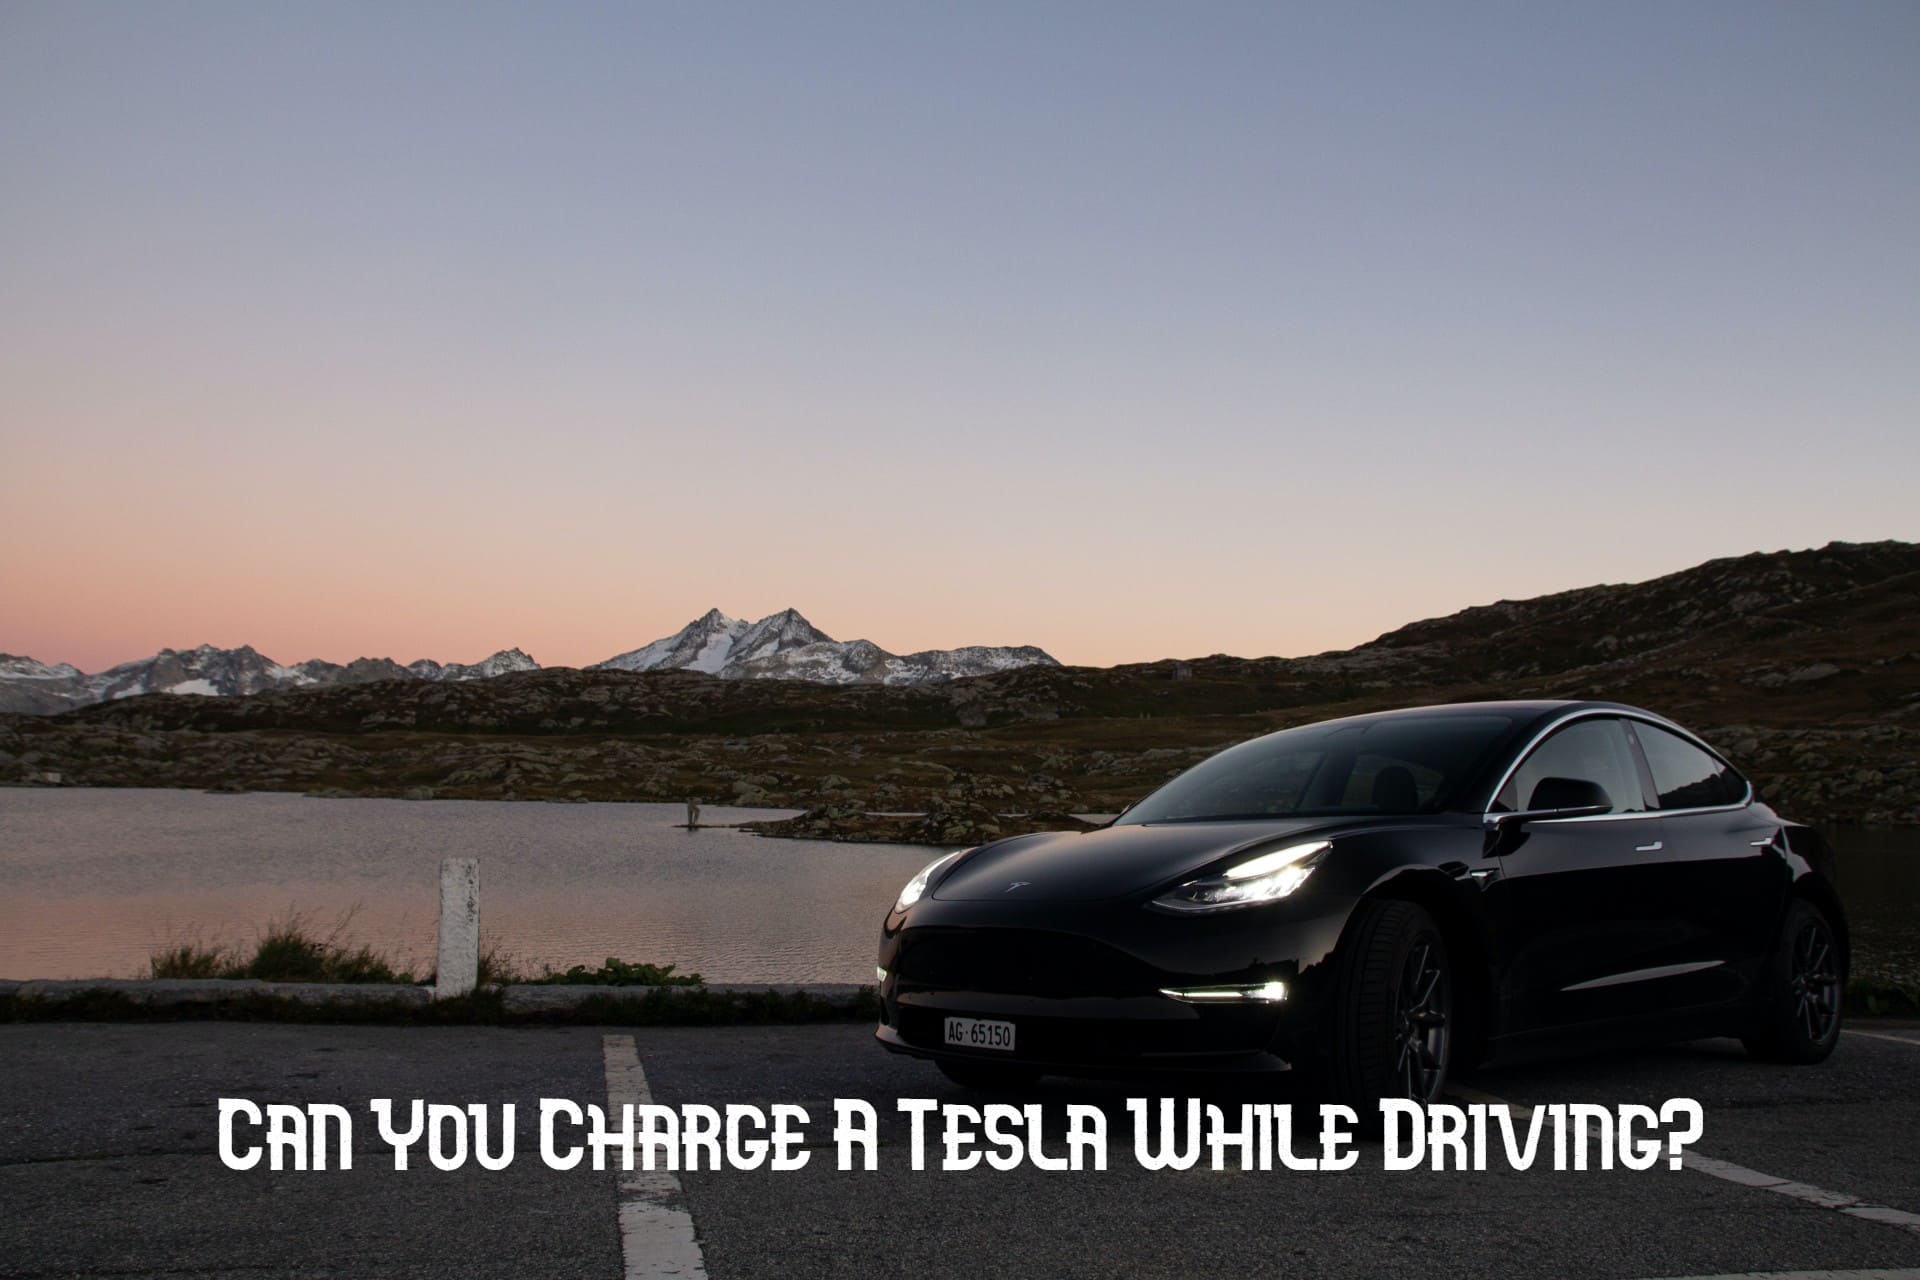 Can You Charge a Tesla While Driving?